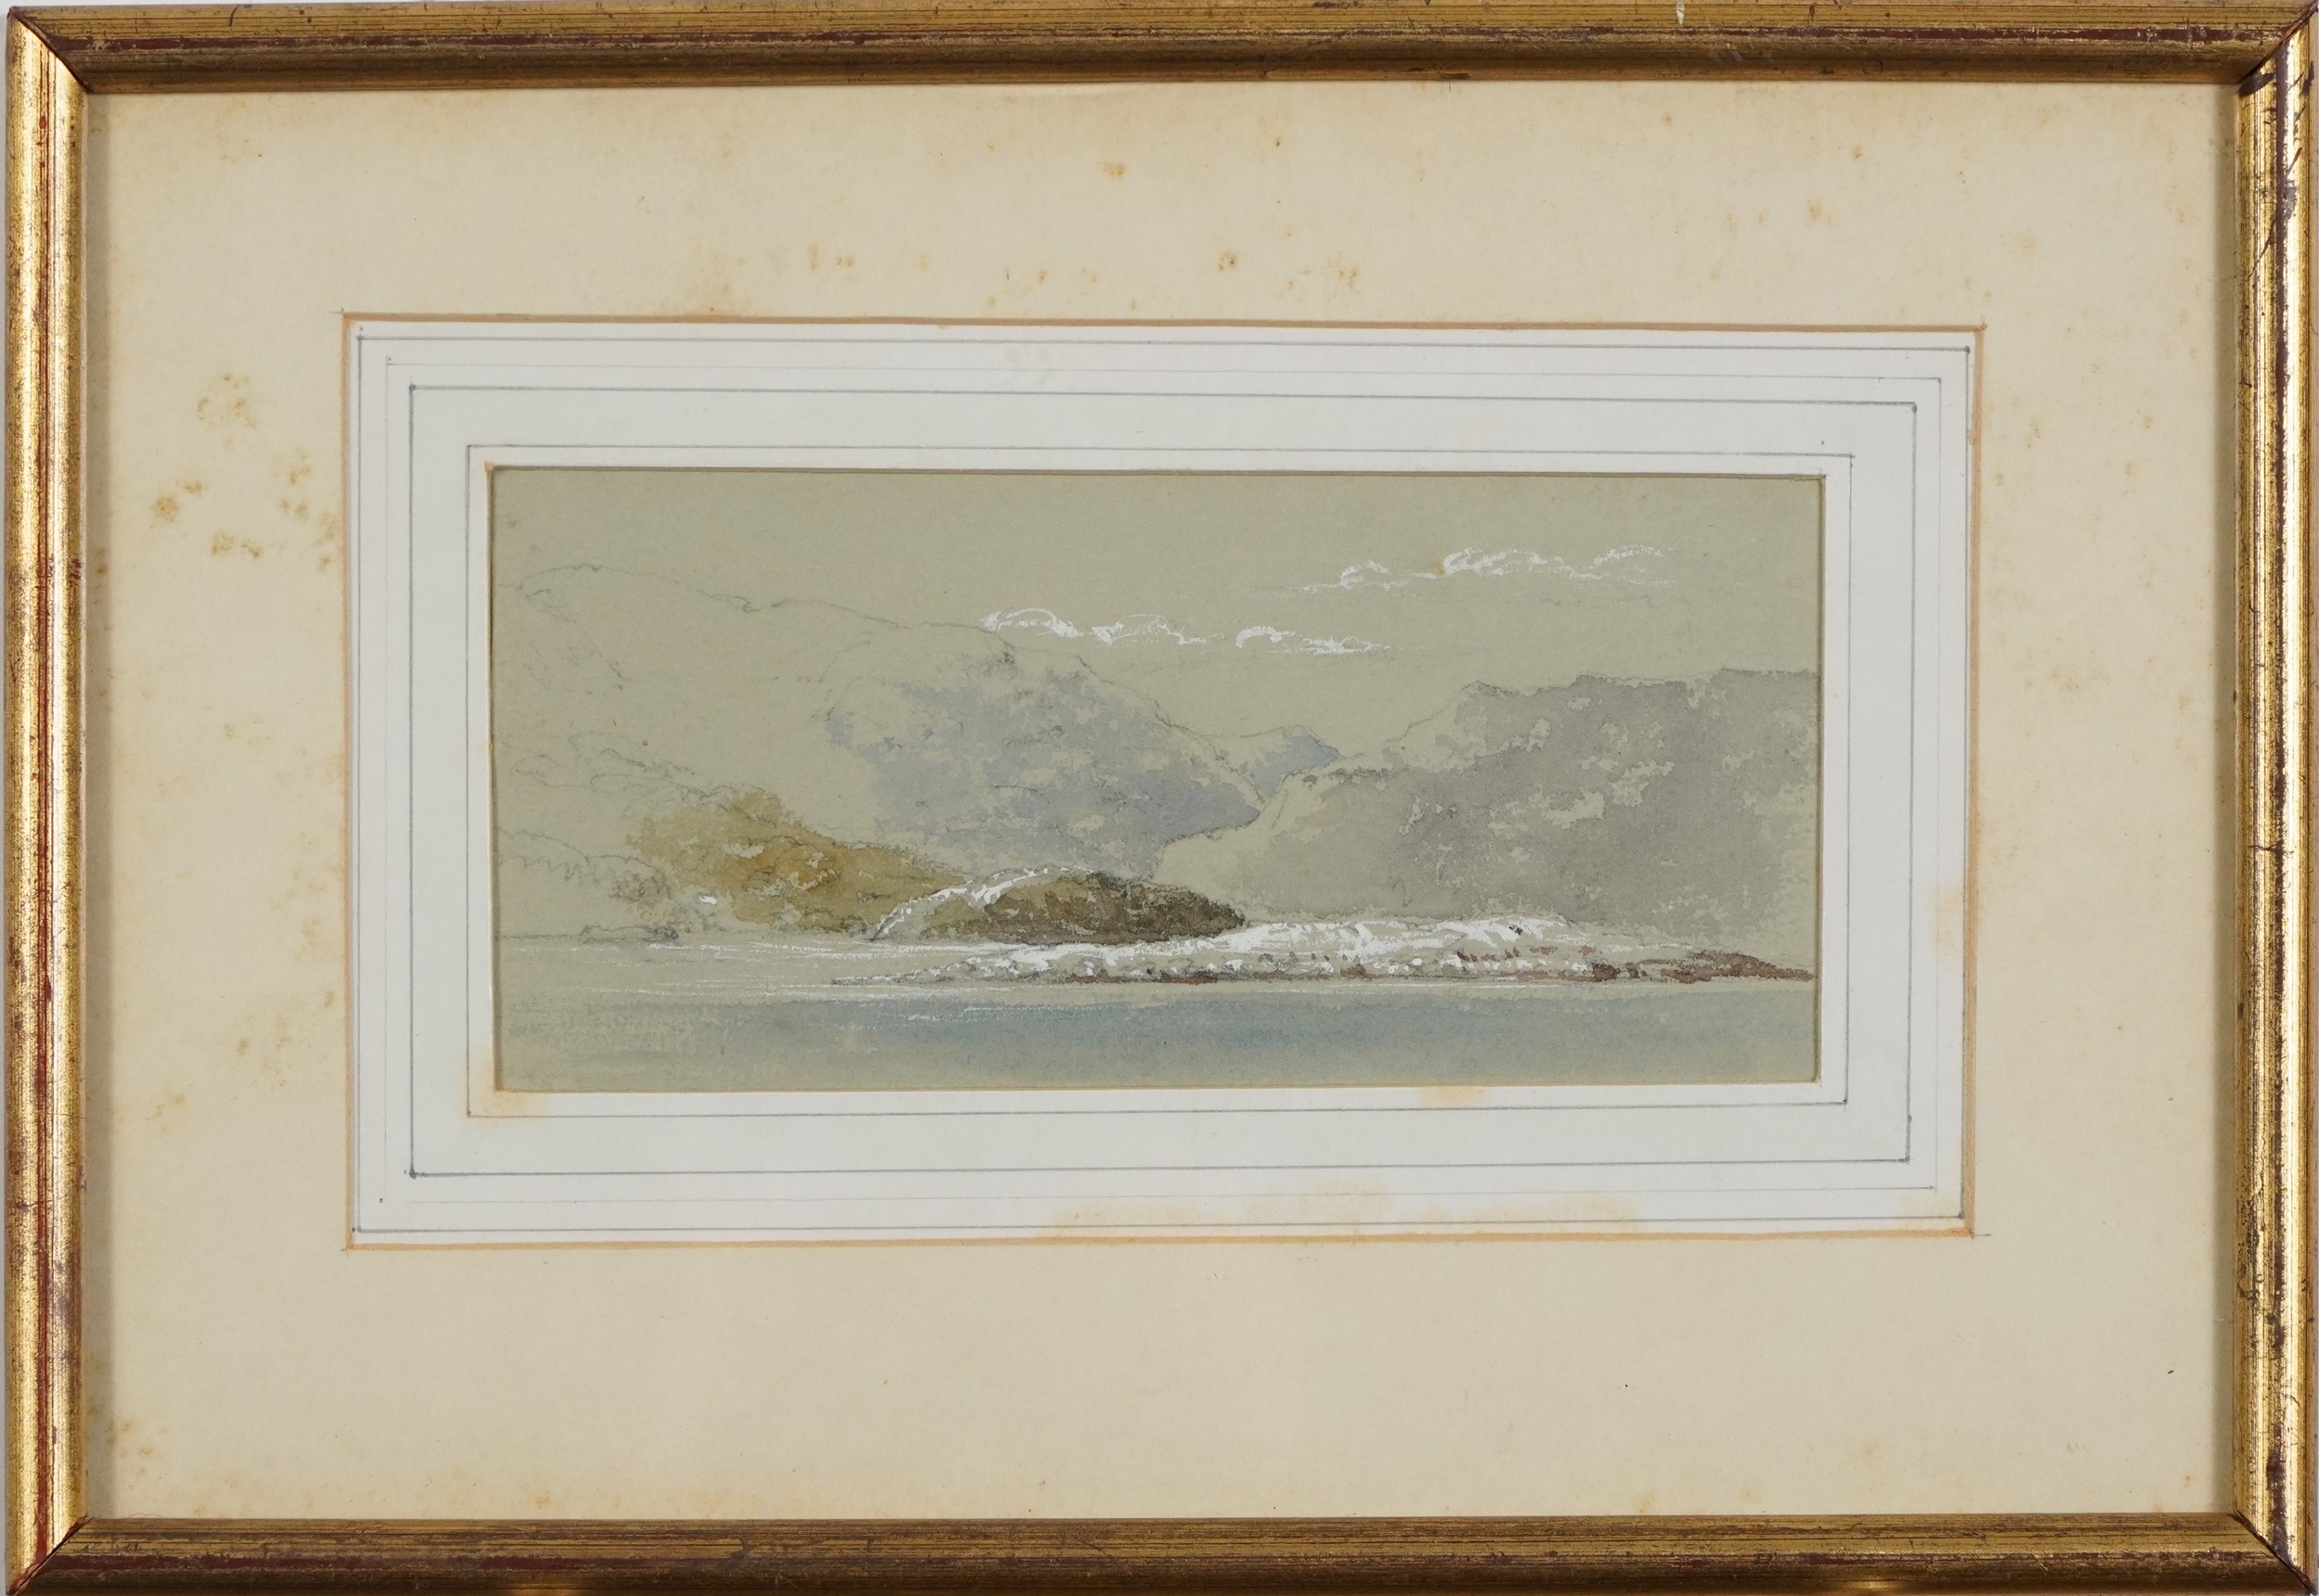 George Wallis - Entrance to Loch Roddin, Isles of Bute, 19th century Scottish heightened - Image 2 of 4